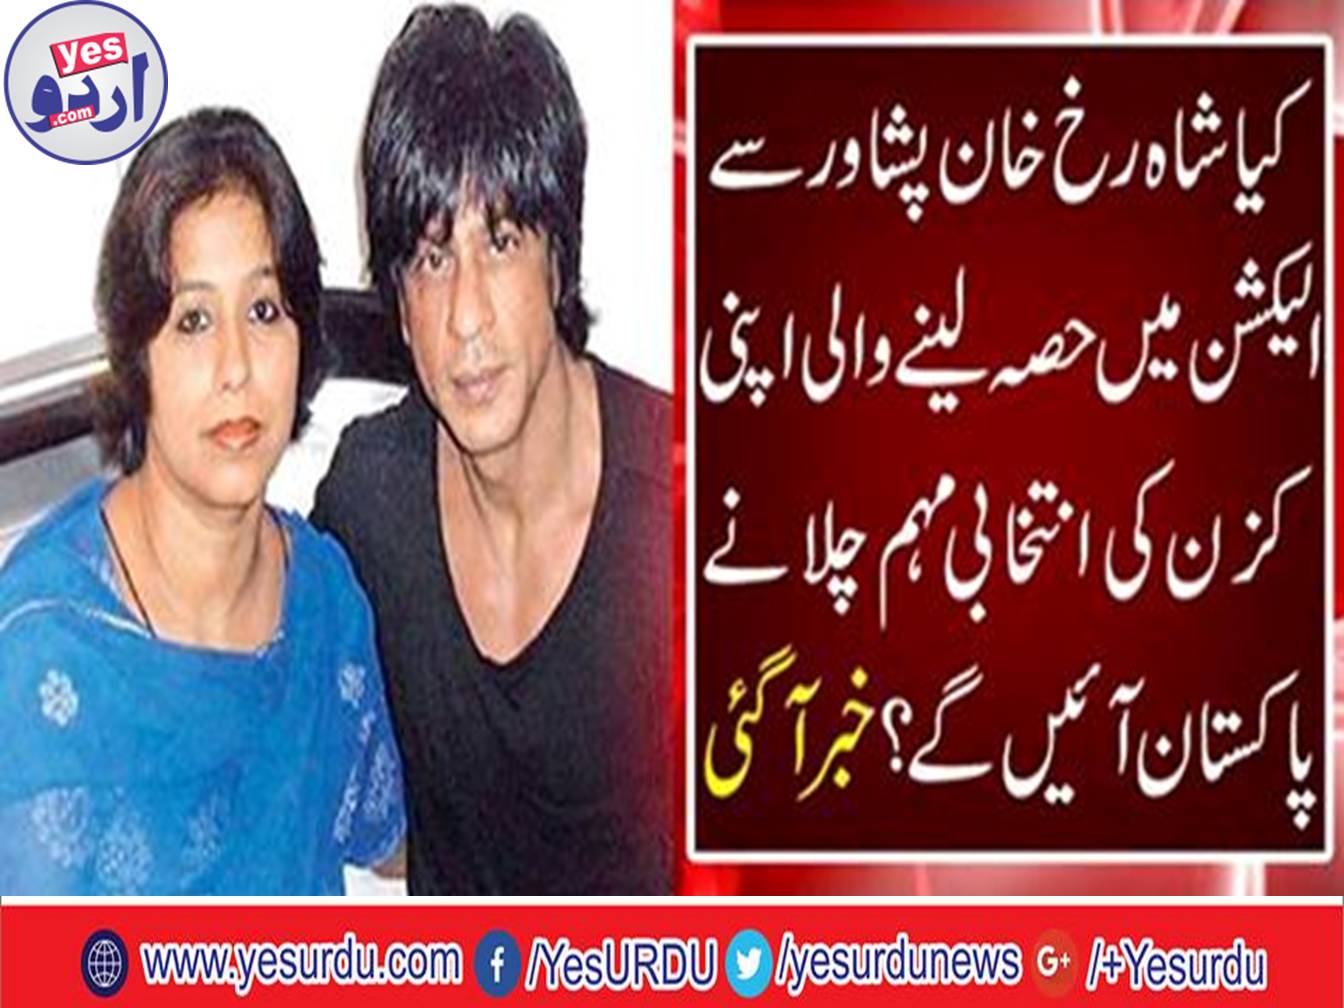 Will Shahrukh Khan come to Pakistan to participate in elections campaign of cousin from Peshawar?